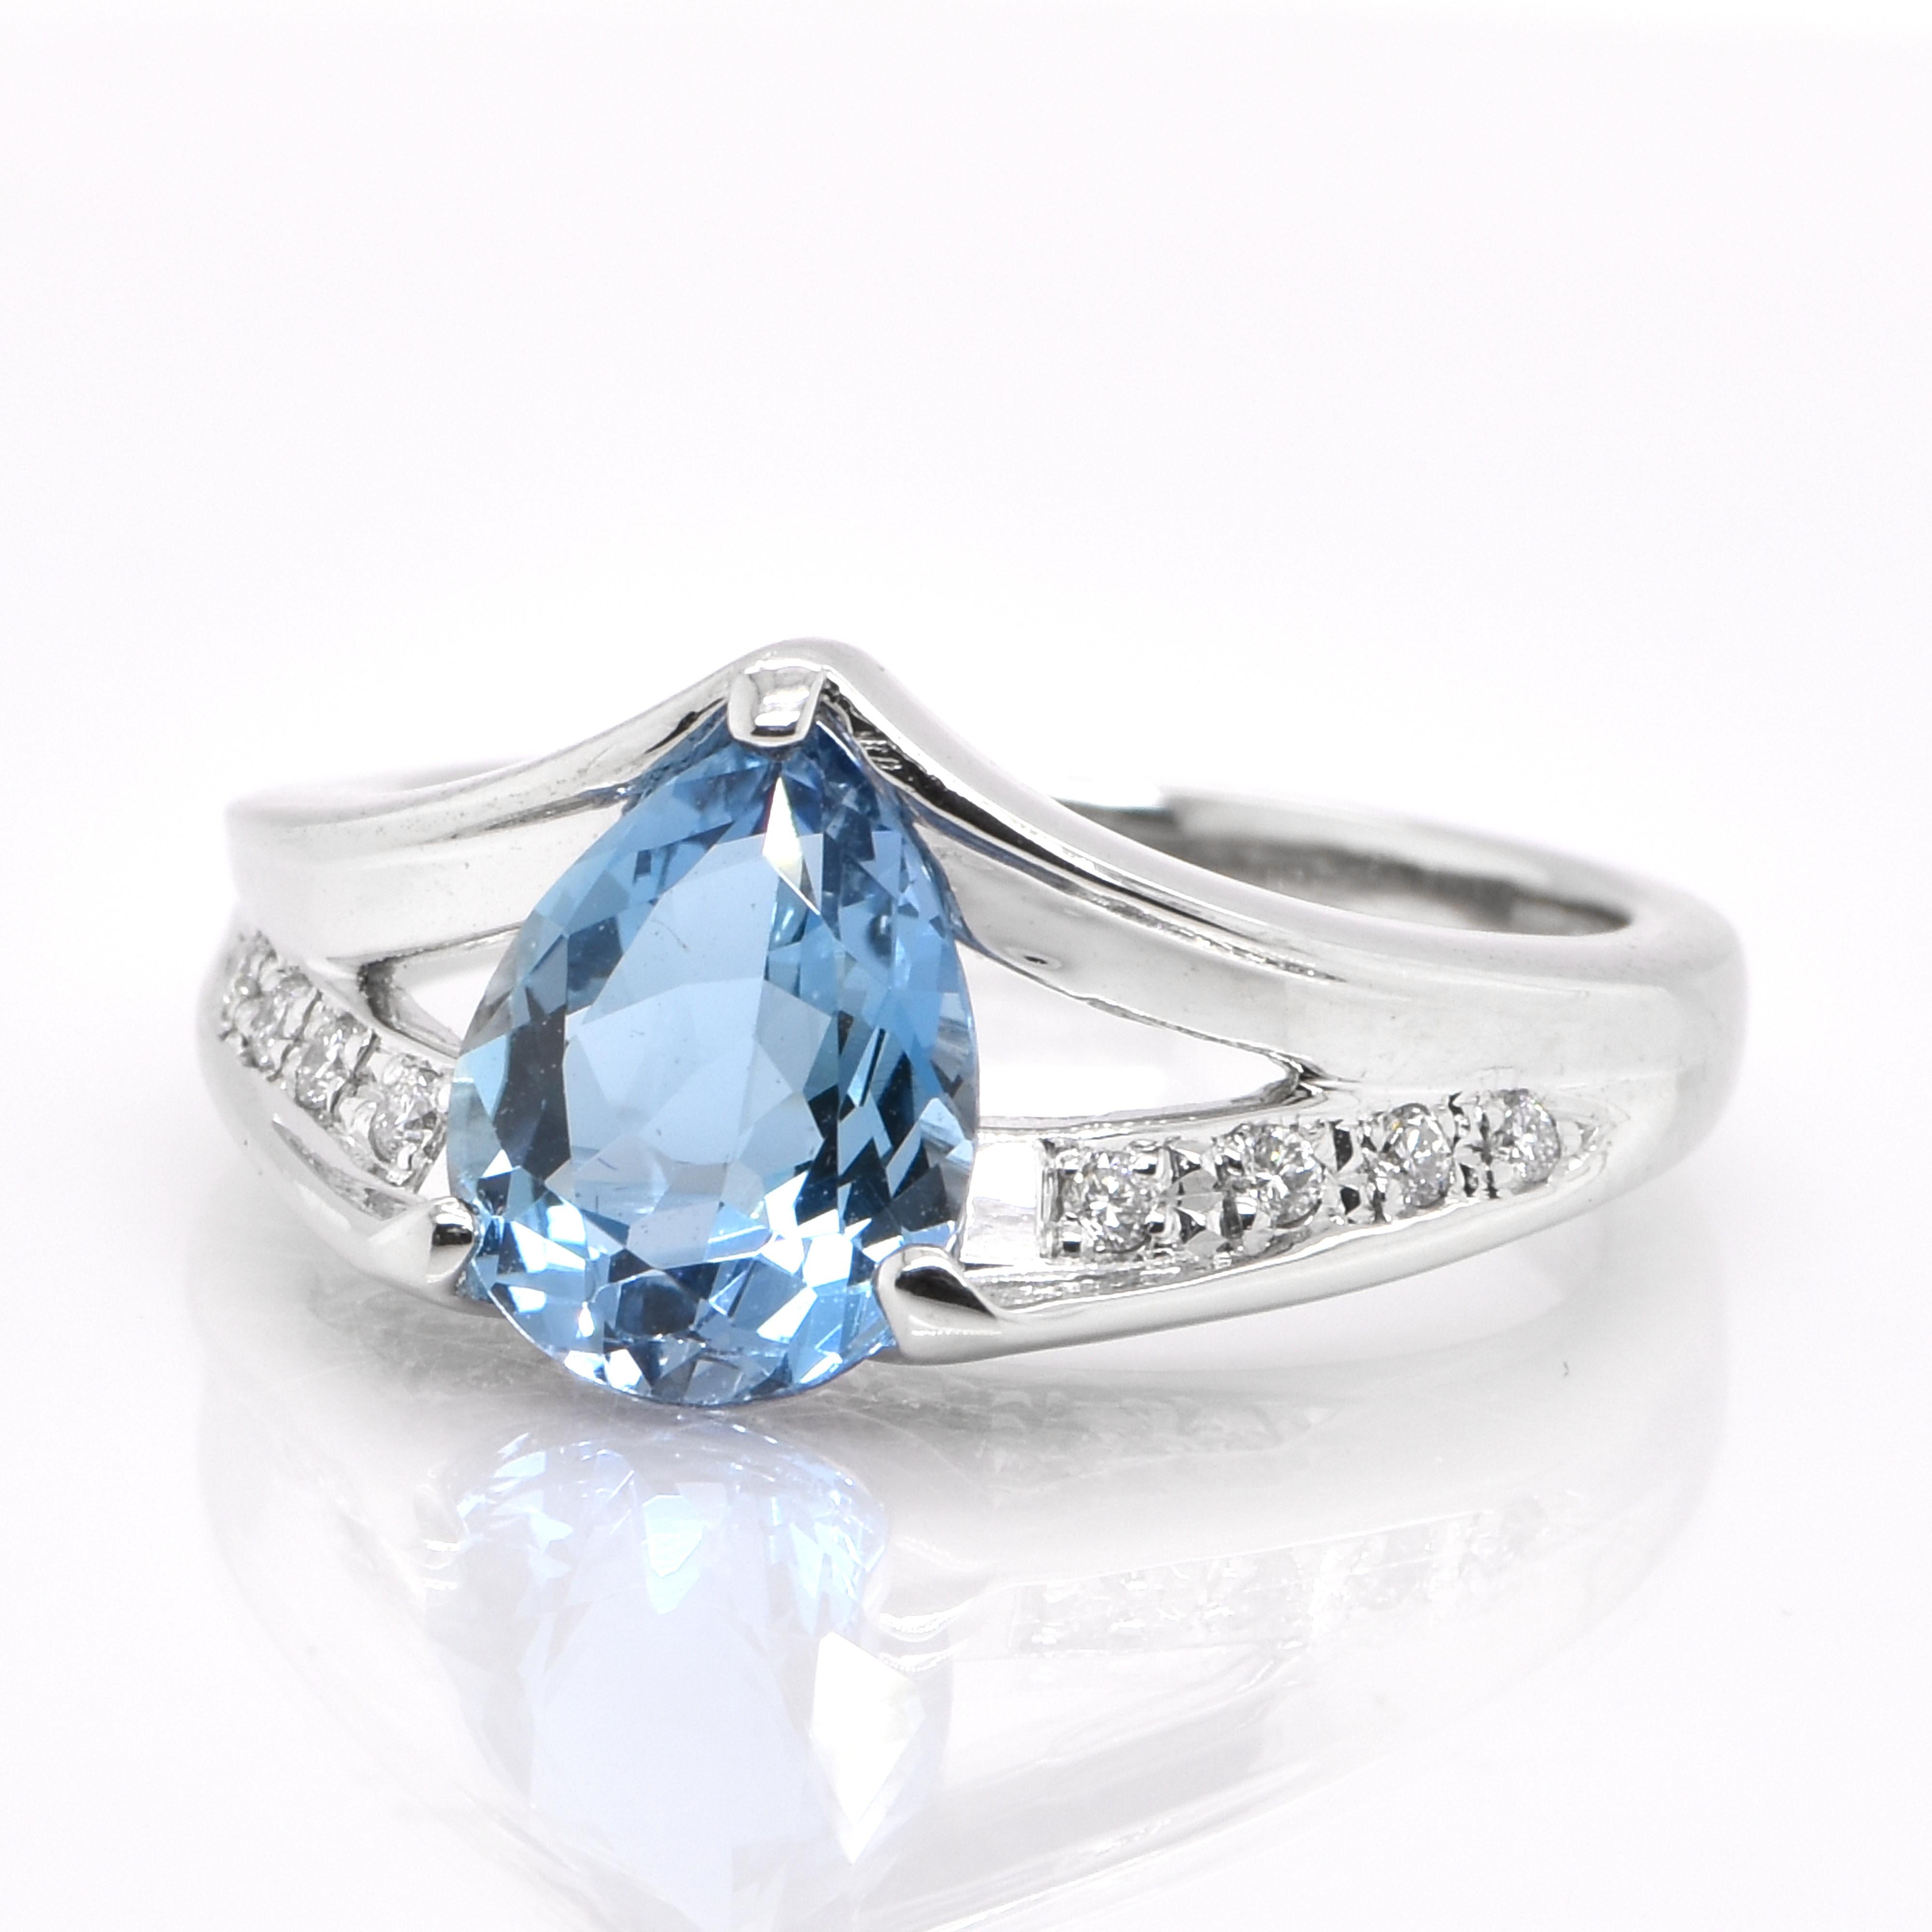 A beautiful Ring featuring a 1.51 Carat, Natural Santa Maria Aquamarine and 0.15 Carats of Diamond Accents set in Platinum. Aquamarines have been prized gems throughout human history for their cool blue color. They historically come from the Minas